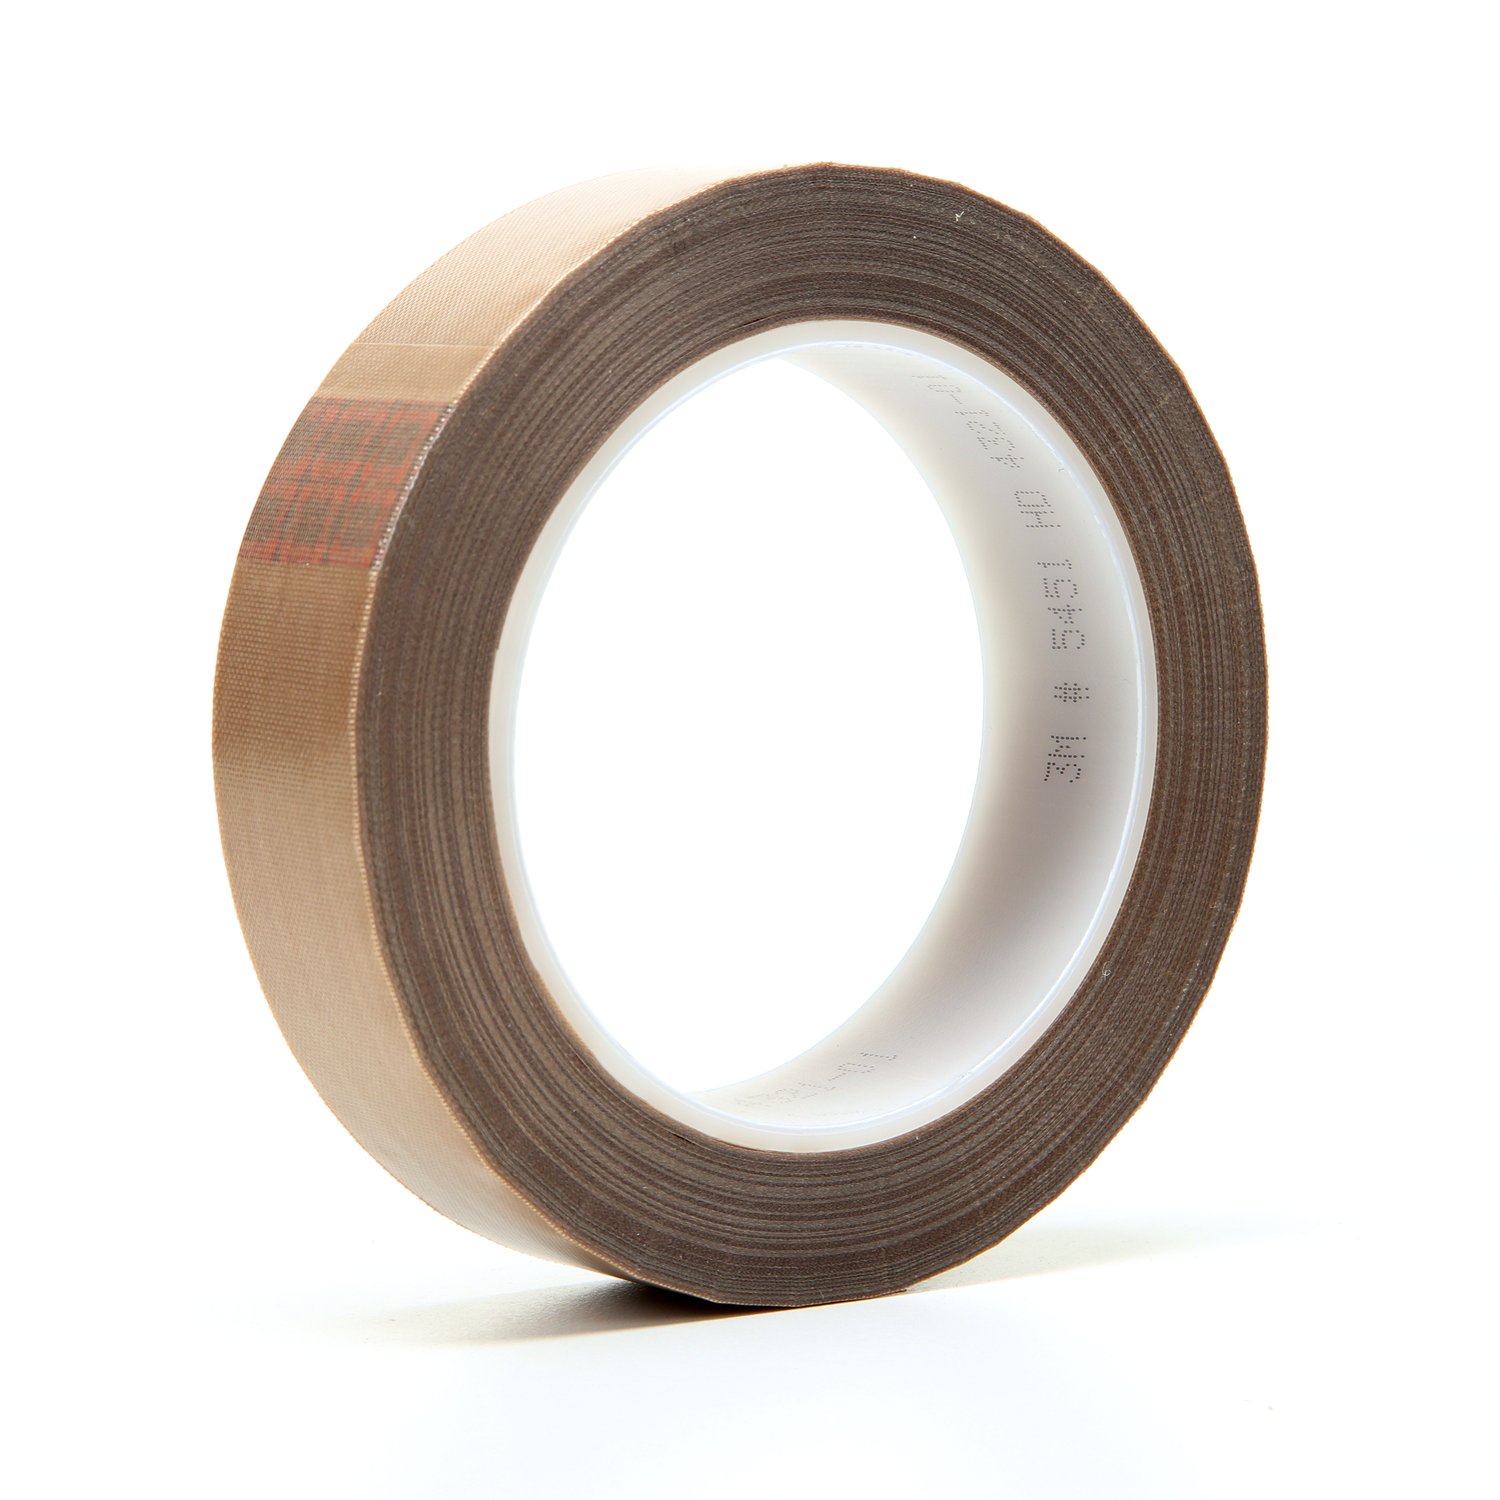 7000029154 - 3M PTFE Glass Cloth Tape 5451, Brown, 1 in x 36 yd, 5.6 mil, 9 rolls
per case, Boxed